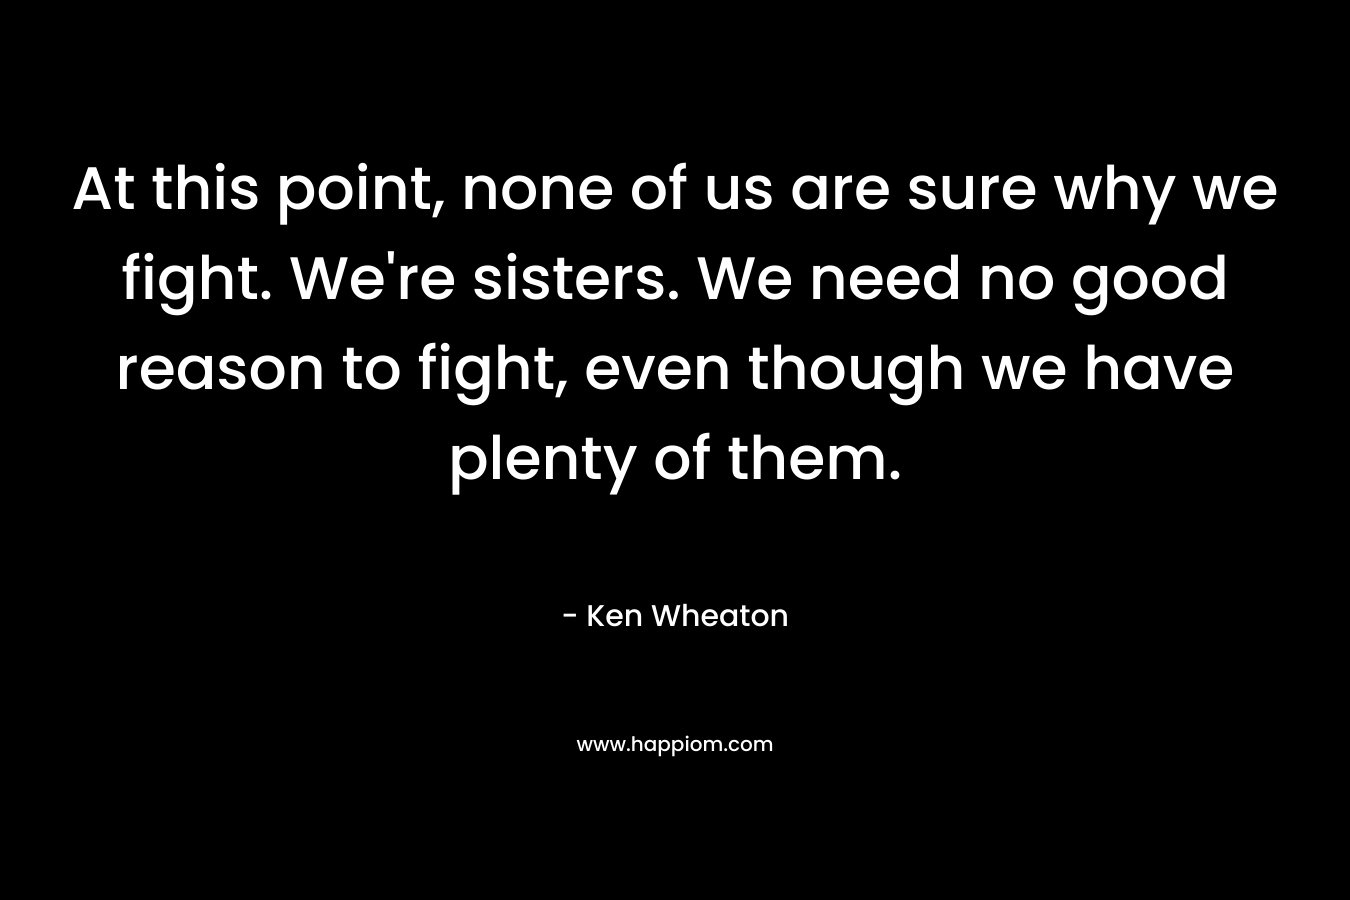 At this point, none of us are sure why we fight. We’re sisters. We need no good reason to fight, even though we have plenty of them. – Ken  Wheaton